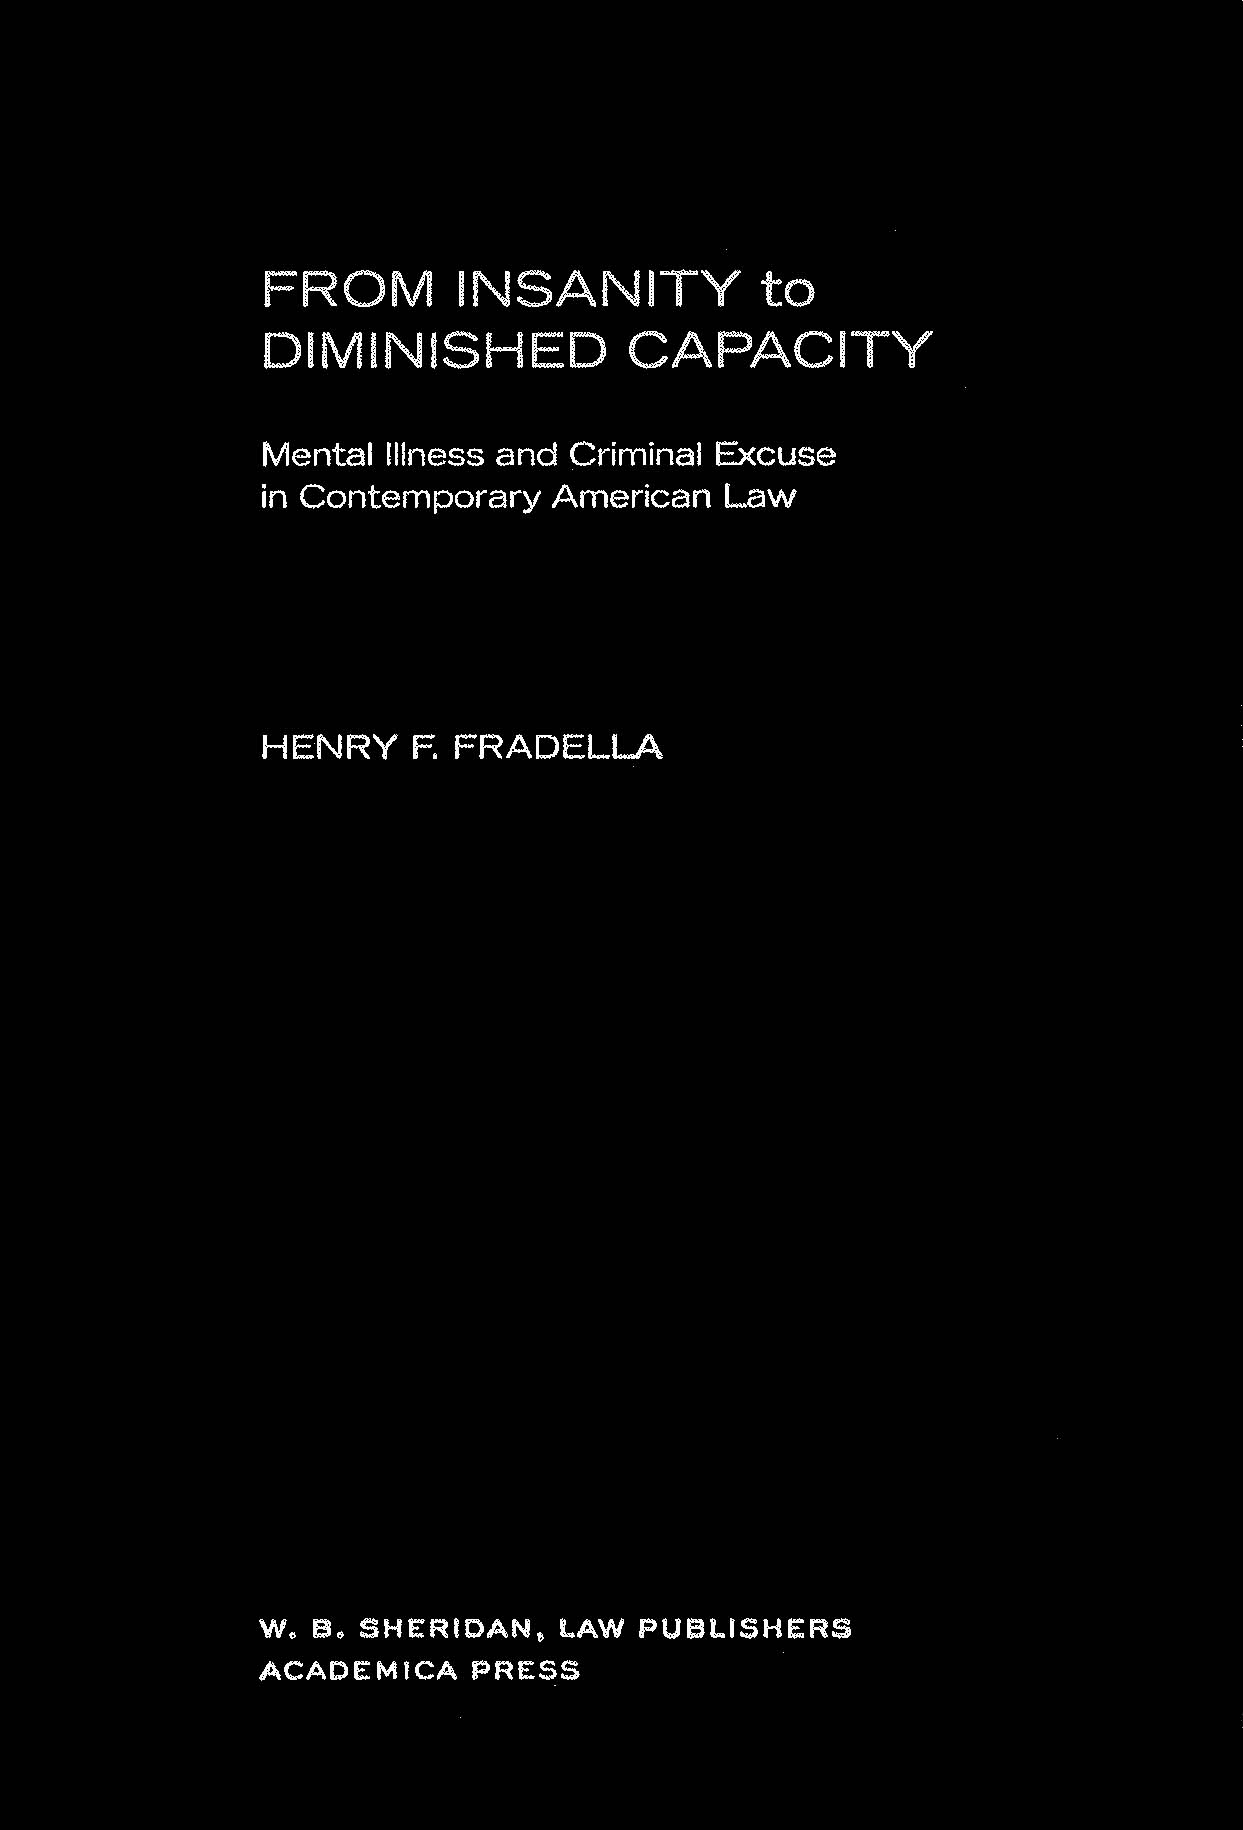 Book cover - From Insanity to Diminished Capacity: Mental Illness and Criminal Excuse in Contemporary American Law